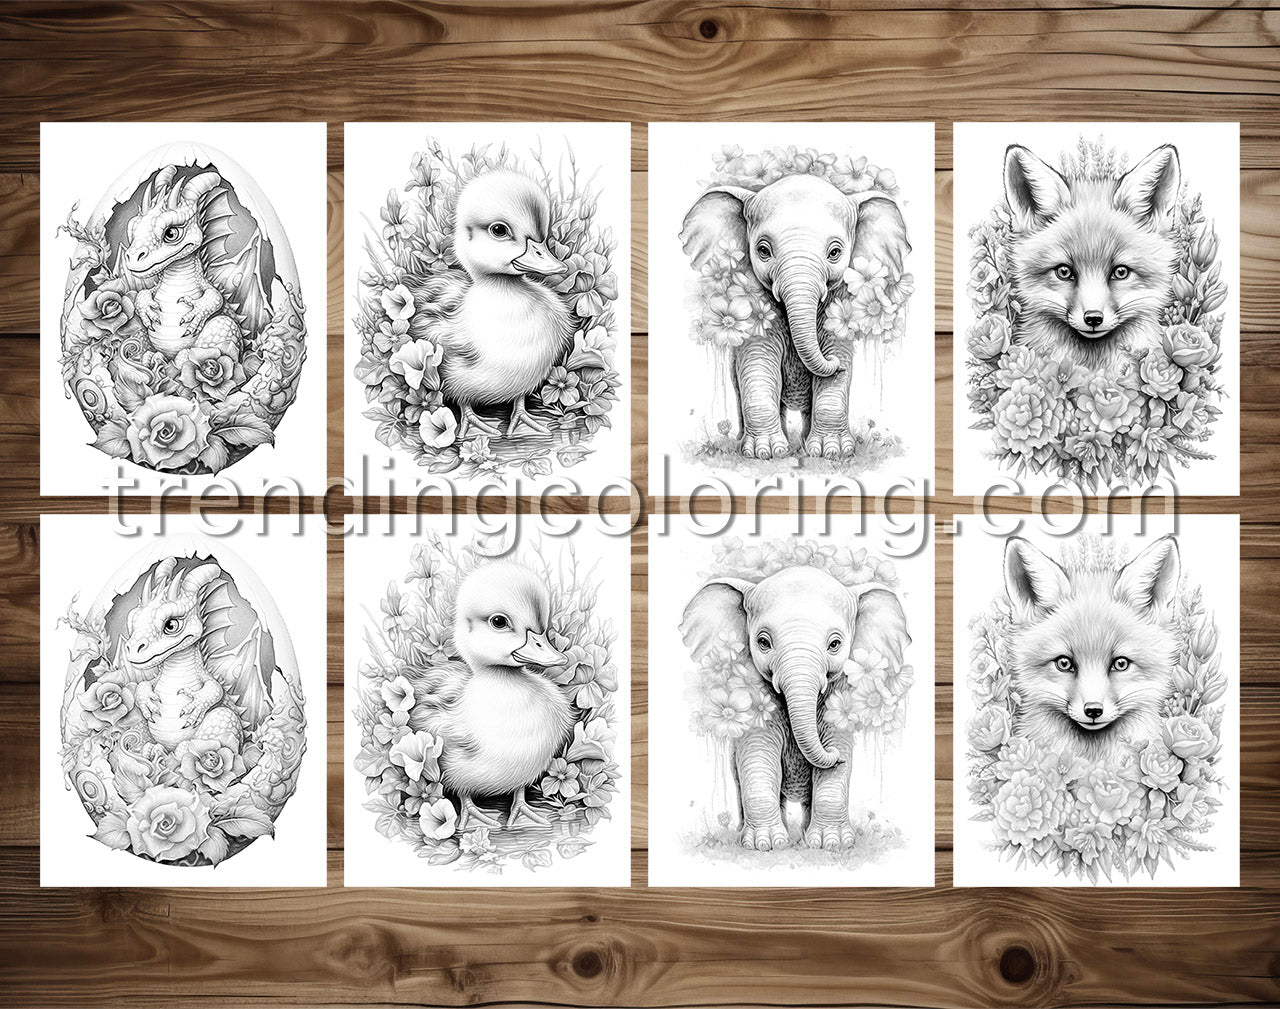 25 Baby Cute Animal Grayscale Coloring Pages - Instant Download - Printable